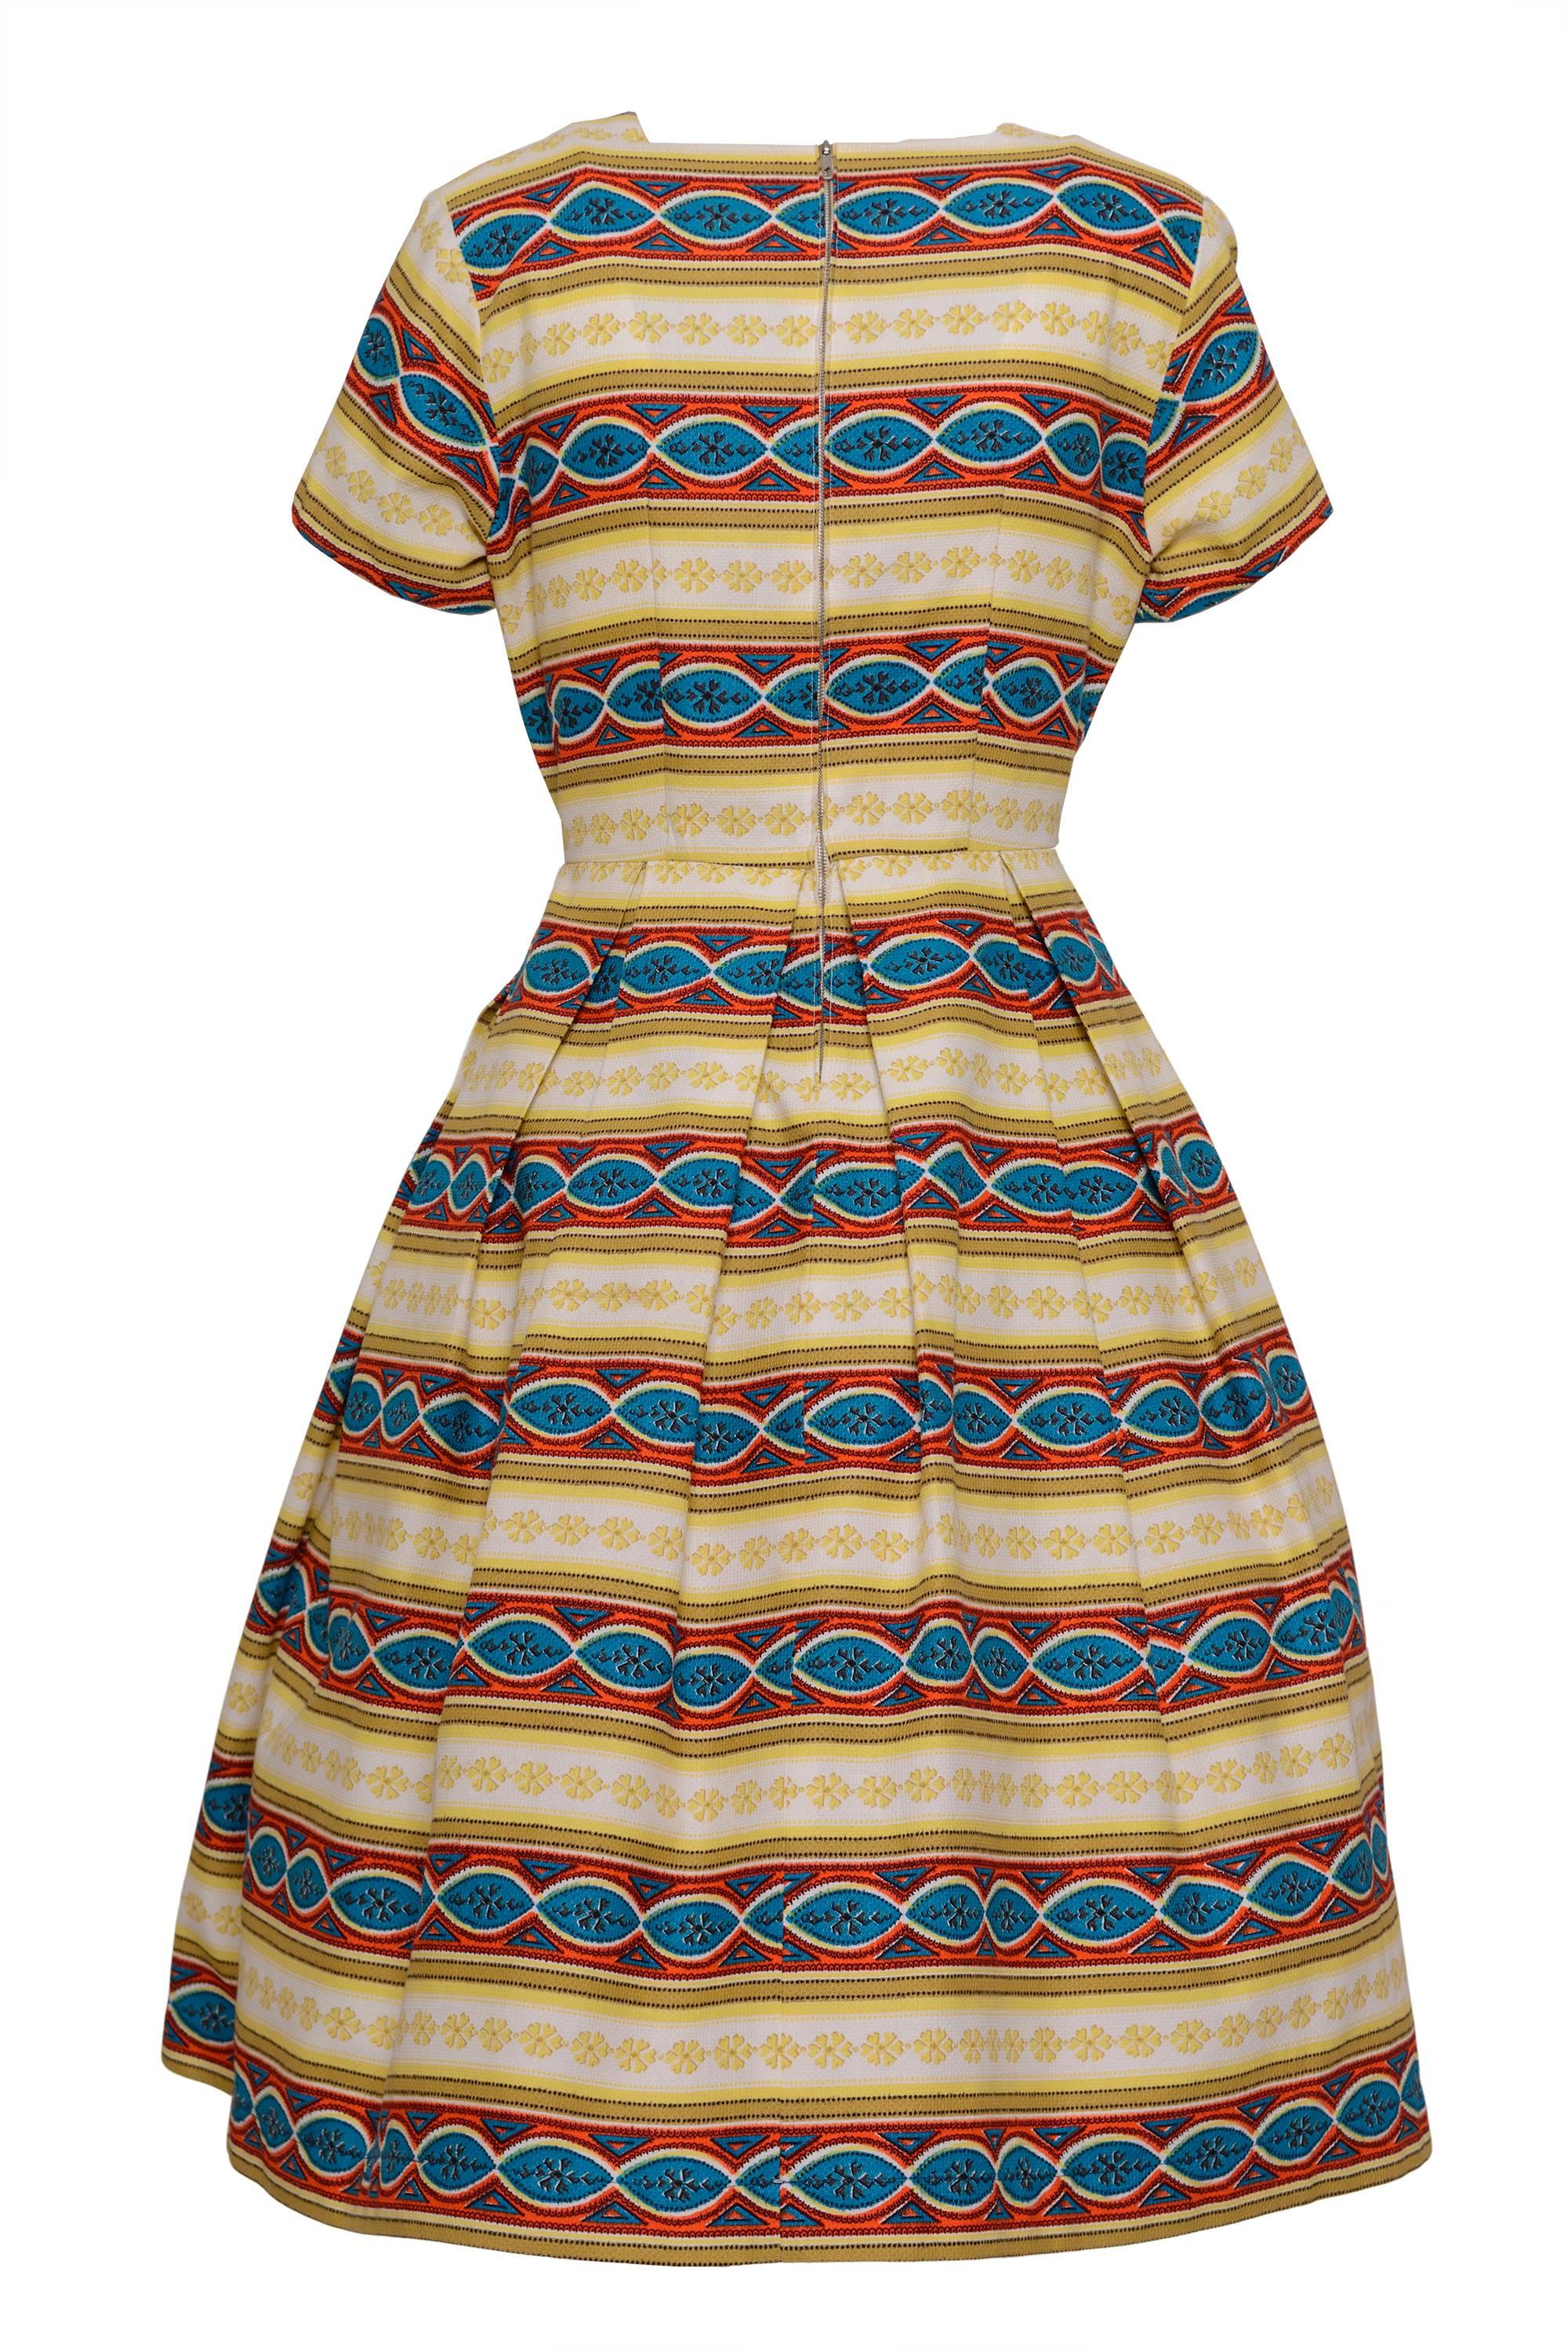 This lovely1950s dress is in cotton pique fabric with a tapestry painted textile. It has back zip closure.

Excellent Vintage Condition 

Label: Unknown 
Fabric: Cotton
Colour: Yellow, Red, Green,Blue, Orange and White 

Measurements:
Estimated size